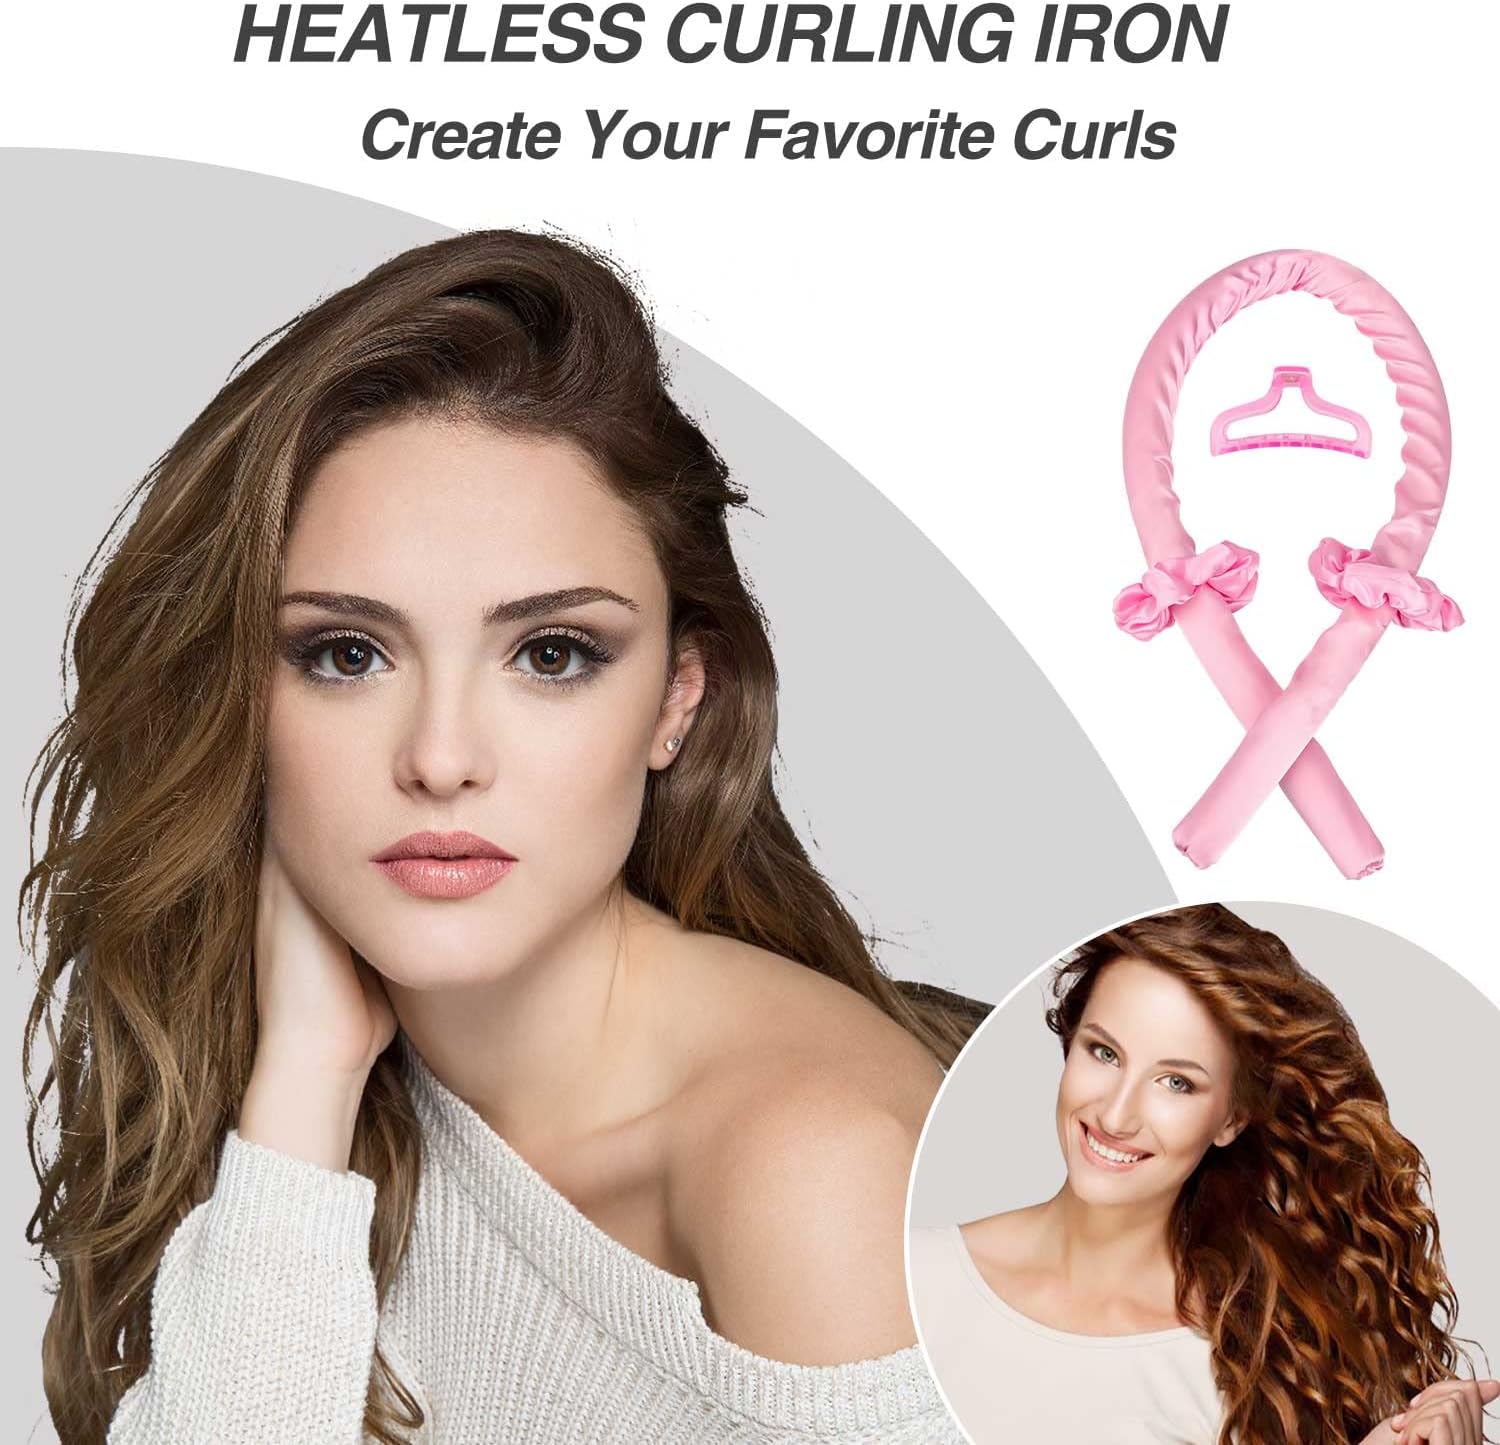 Heatless Curling Rod Headband, Heatless Hair Curler Set Heatless Curlers for Long Hair Satin Heatless Hair Rollers Hair Curlers to Sleep In No Heat Curlers with Hair Clips and Scrunchie (Pink)